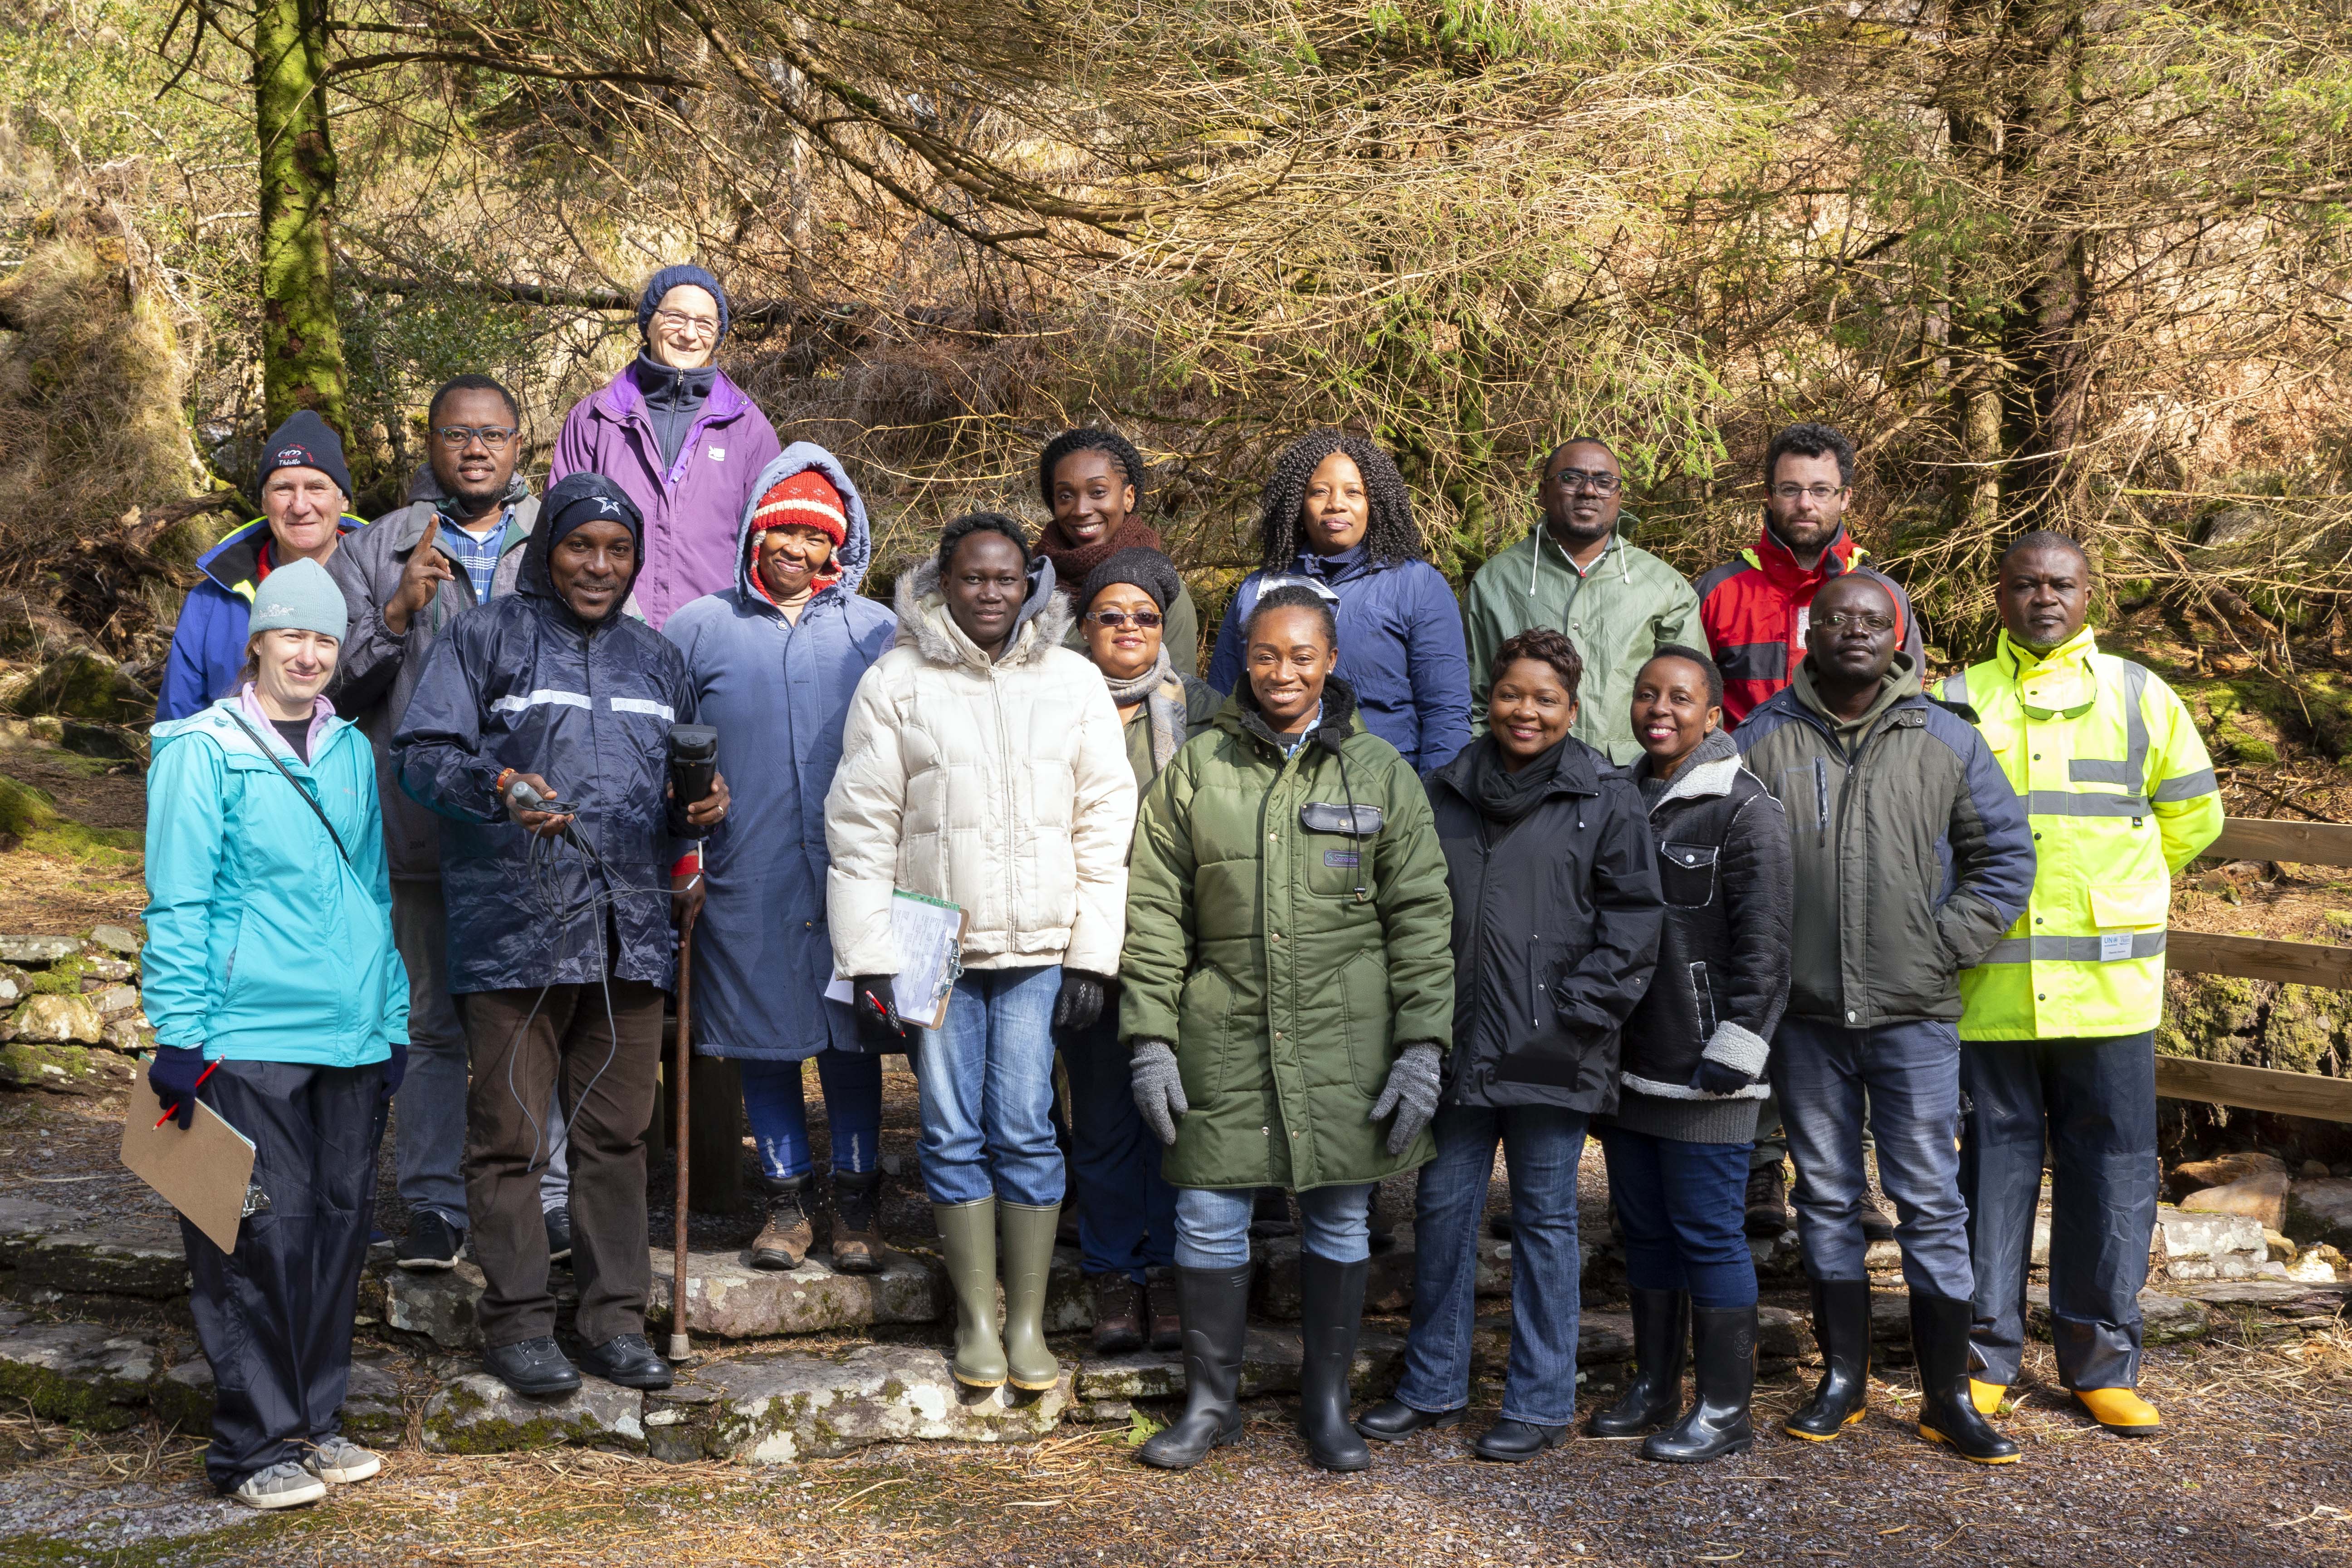 Our Postgraduate Diploma students at Gougane Barra National Park during their field course module